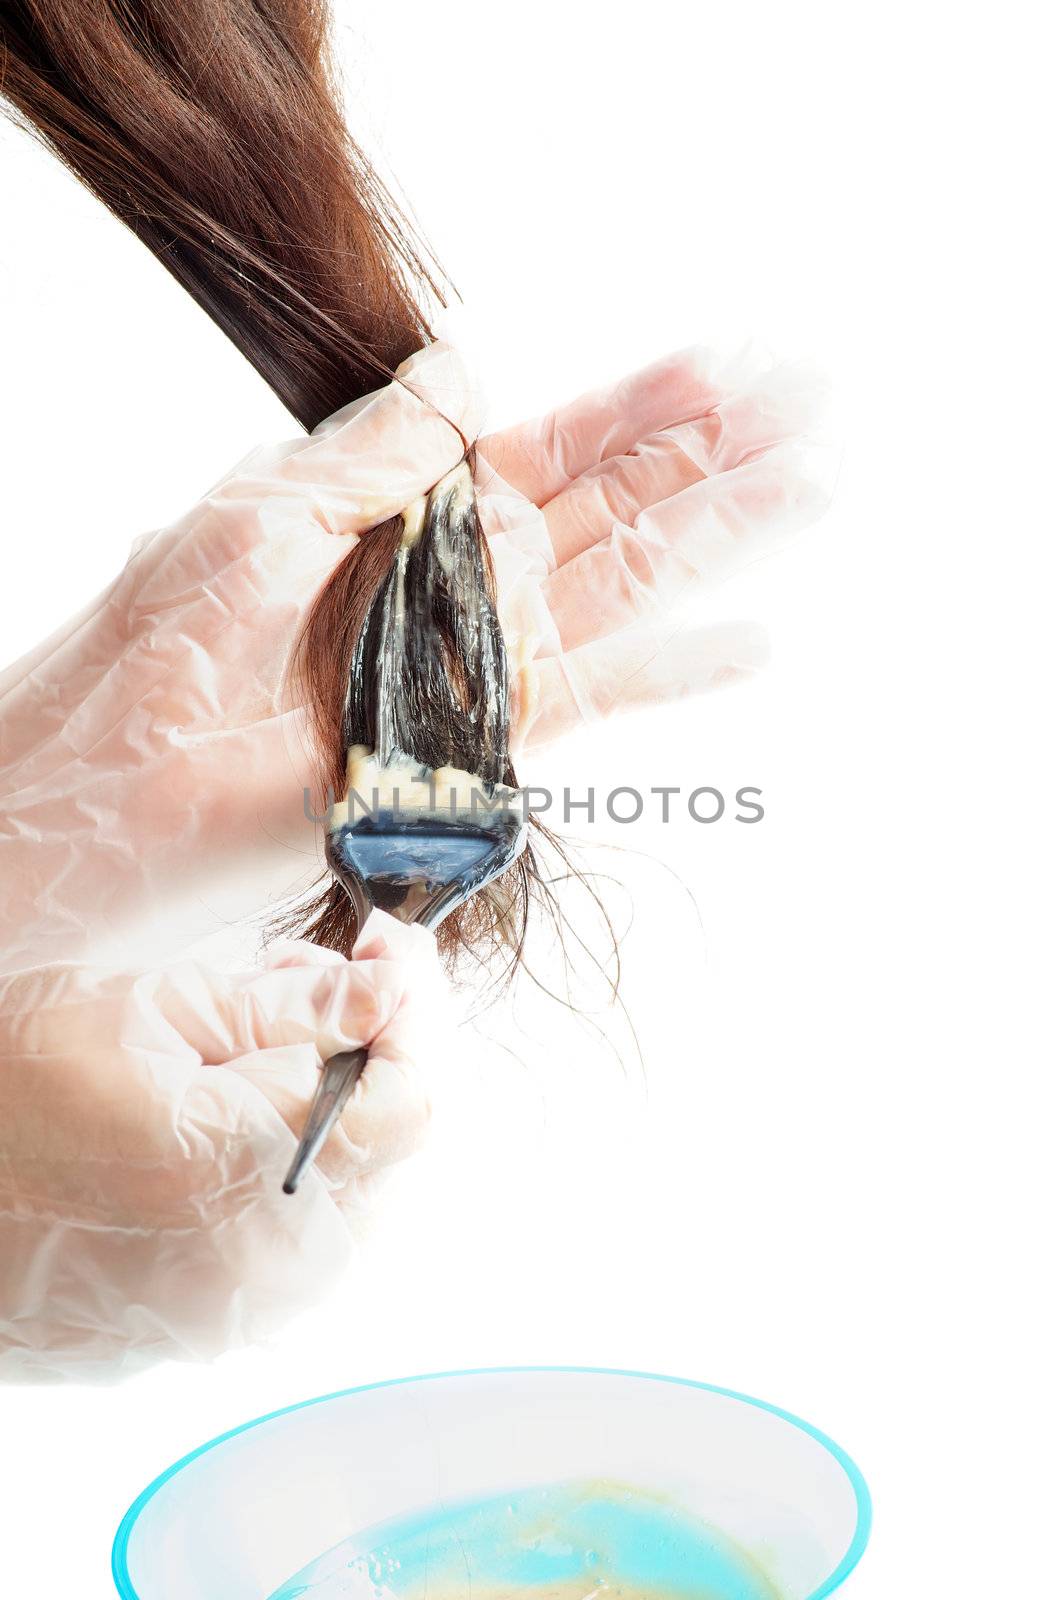 Hands in Protective Gloves  Applies Paintbrush on Hair Dye closeup on white background